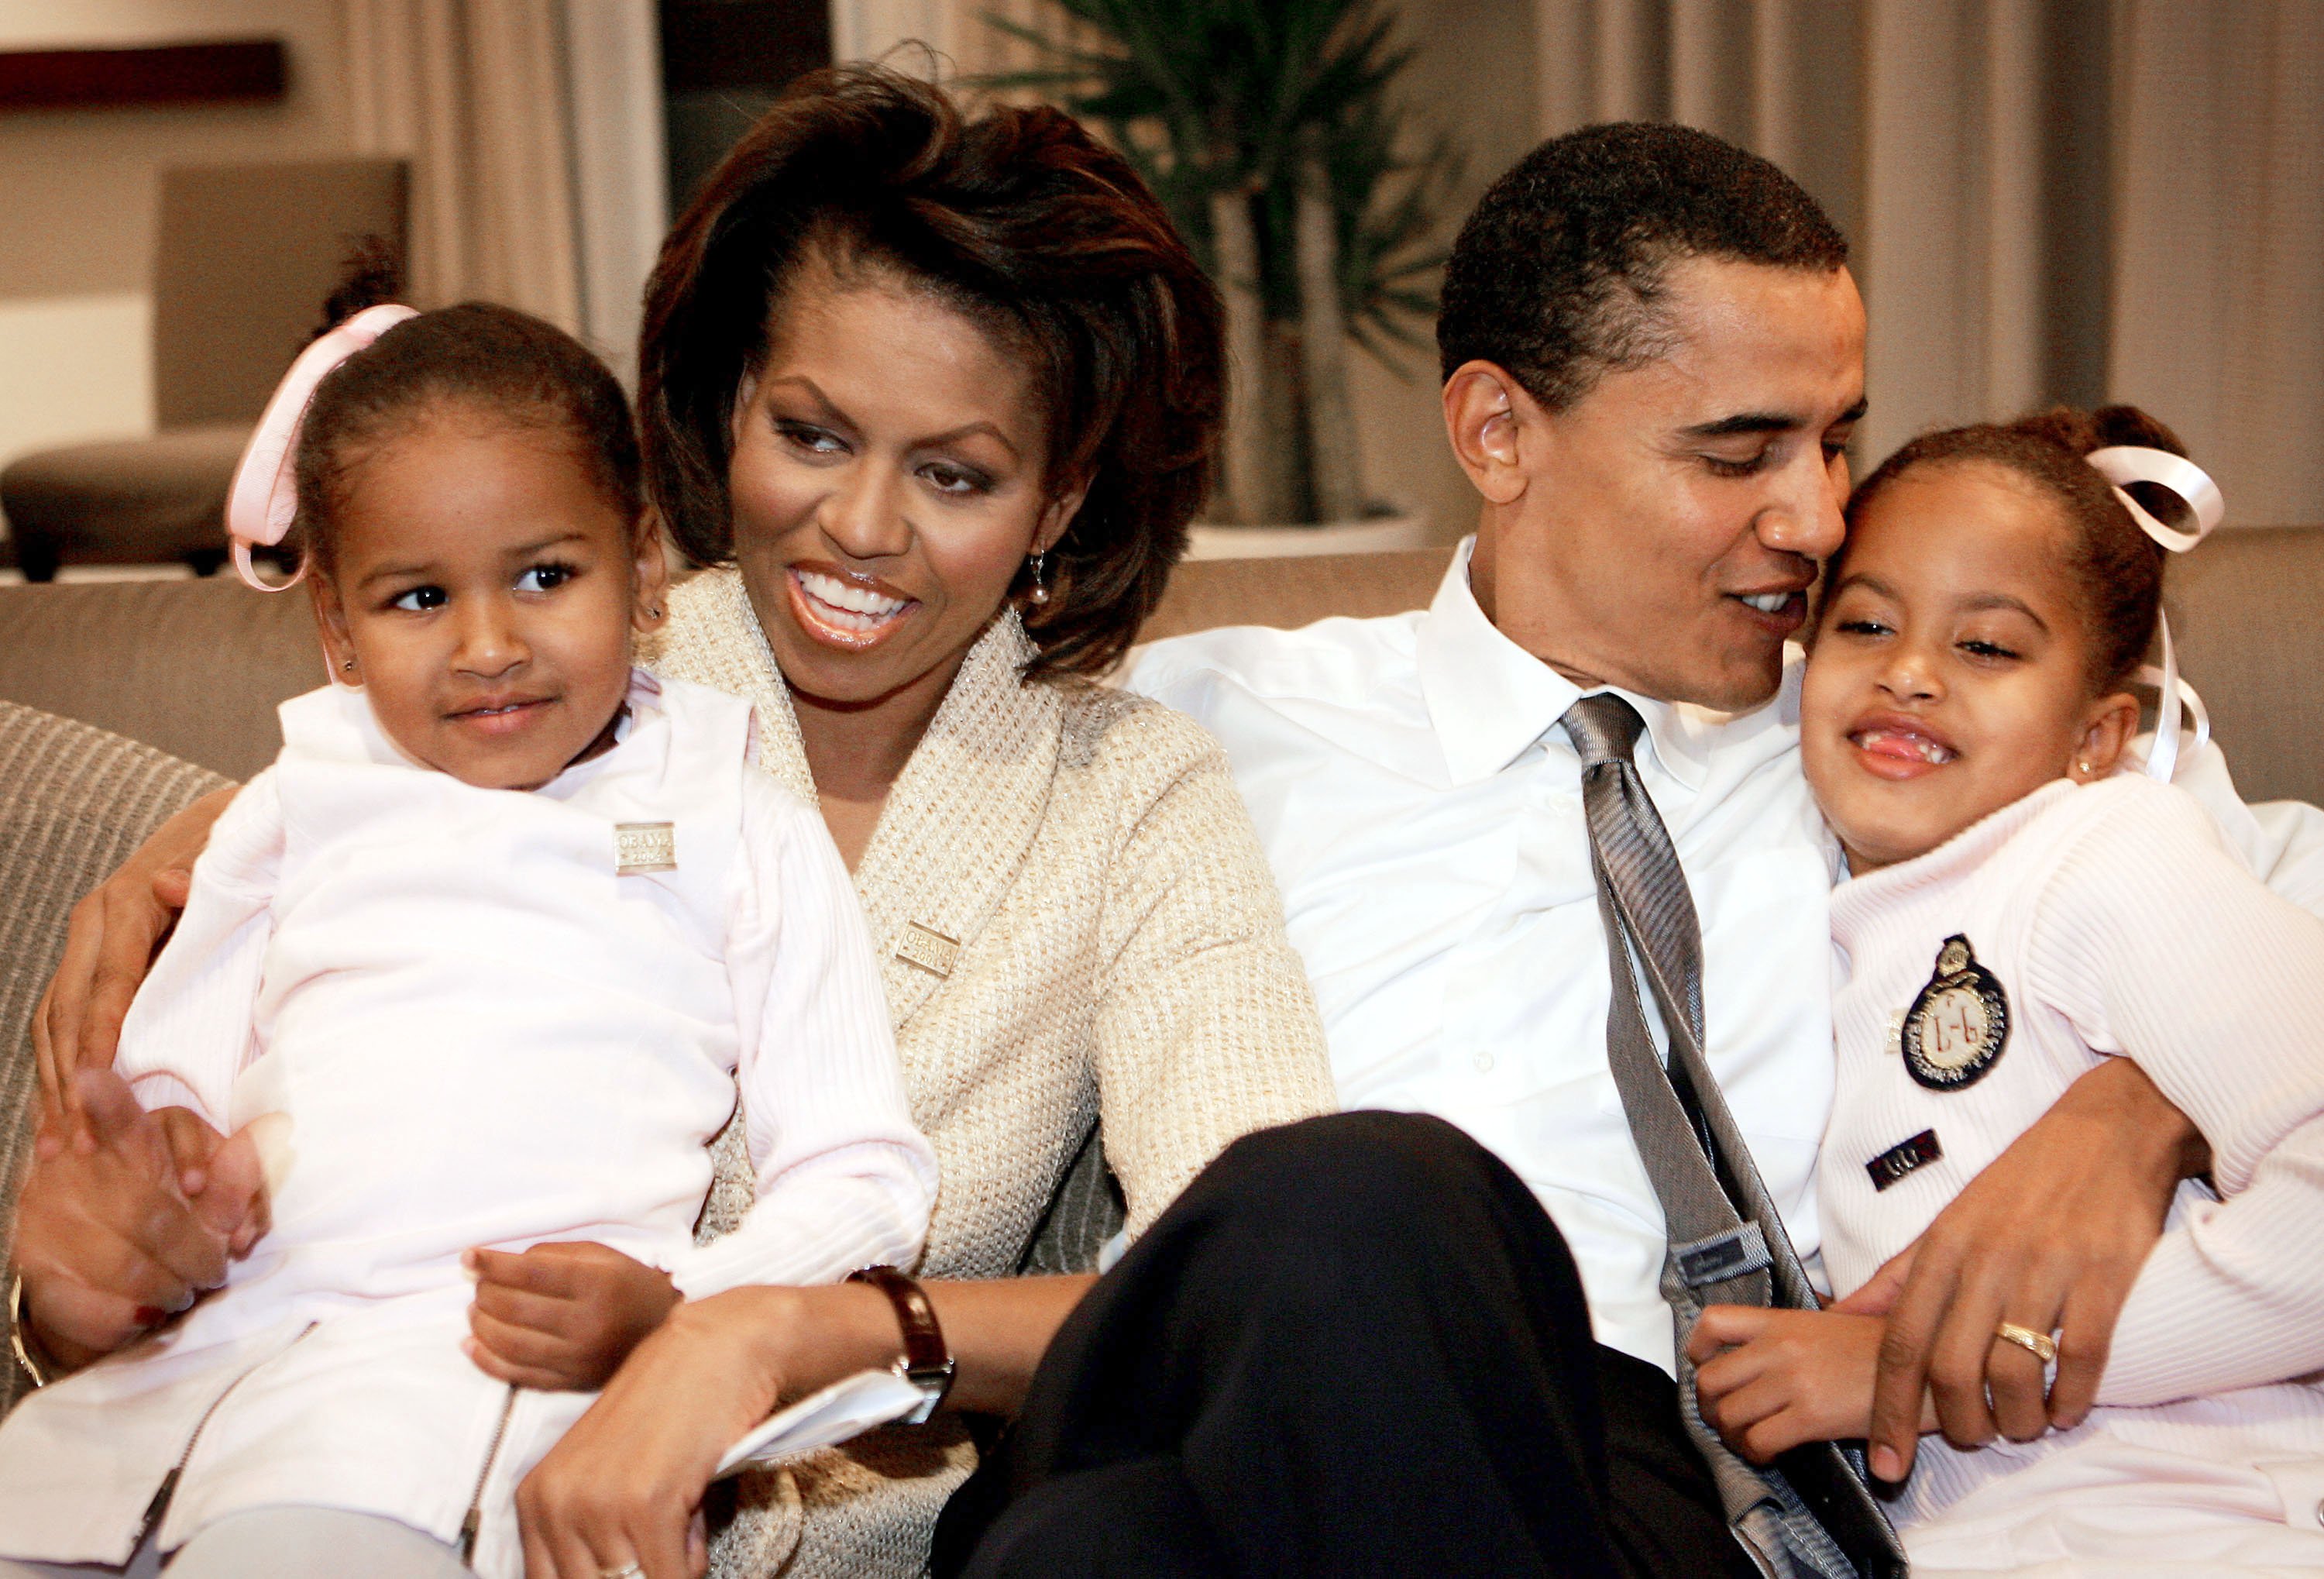 Barack Obama sits with his wife Michelle and daughters Sasha and Malia in a hotel room as they wait for election returns to come in November 2, 2004, in Chicago, Illinois. | Source: Getty Images